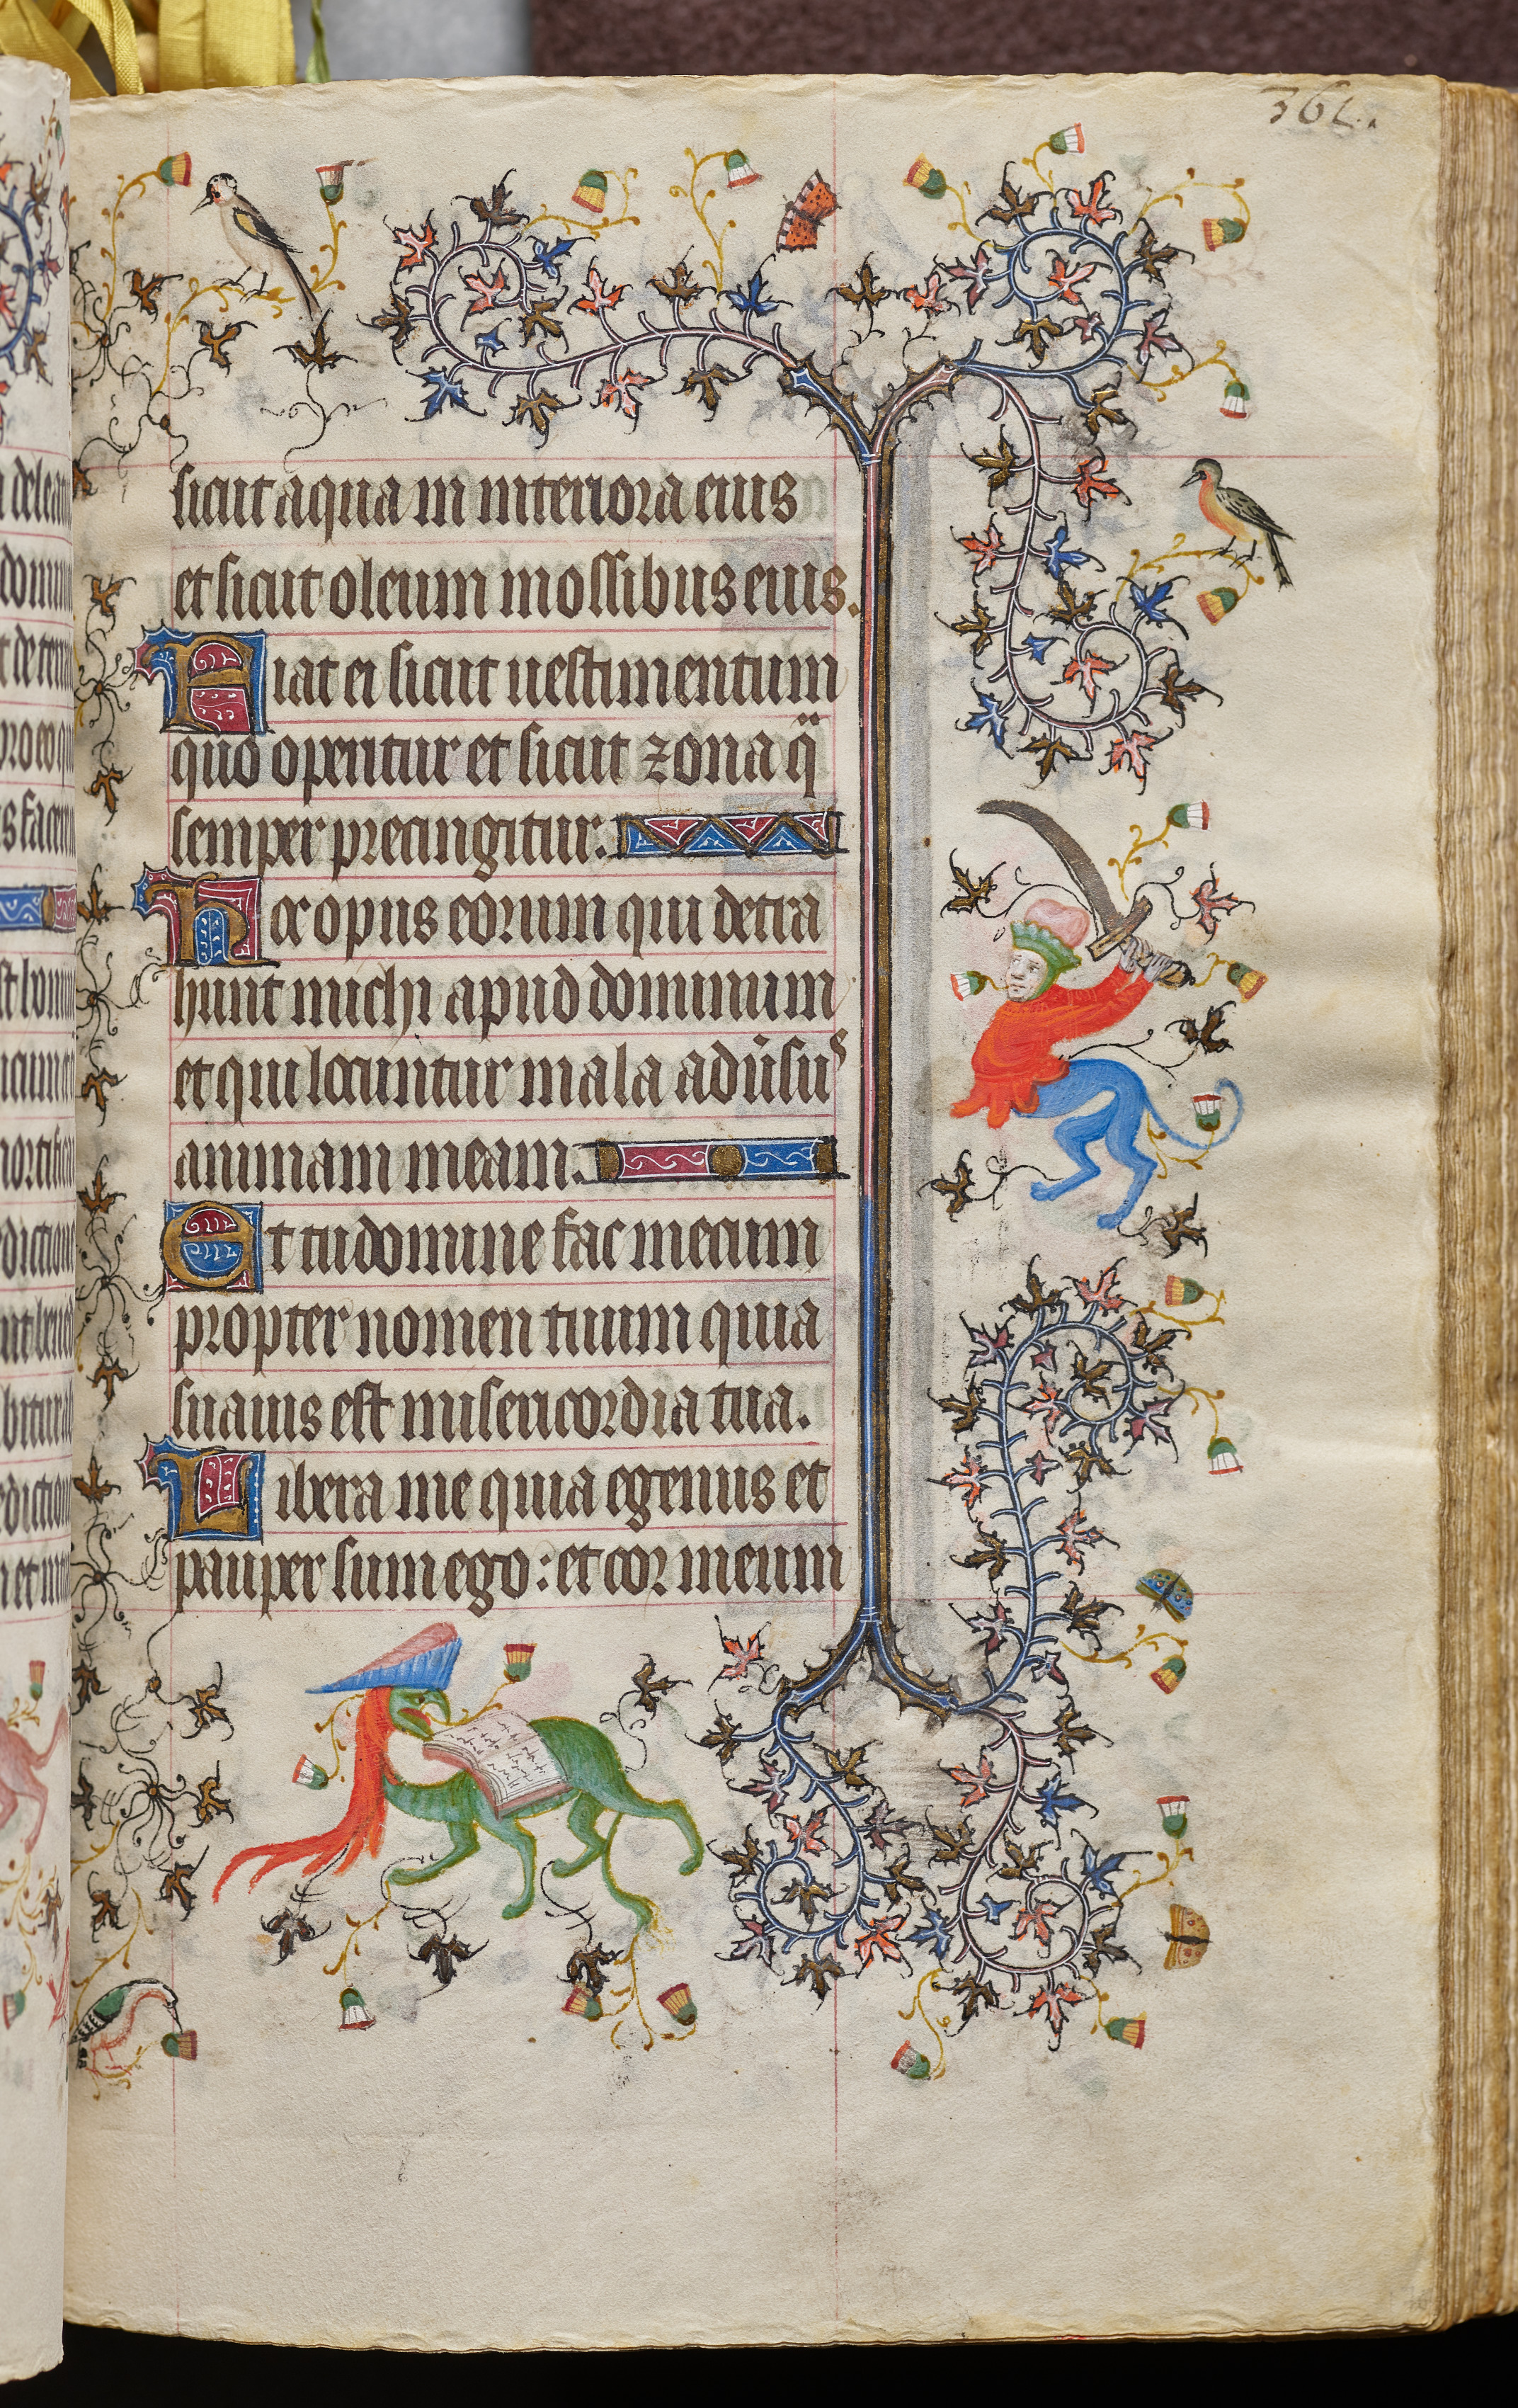 Hours of Charles the Noble, King of Navarre (1361-1425): fol. 176r, Text